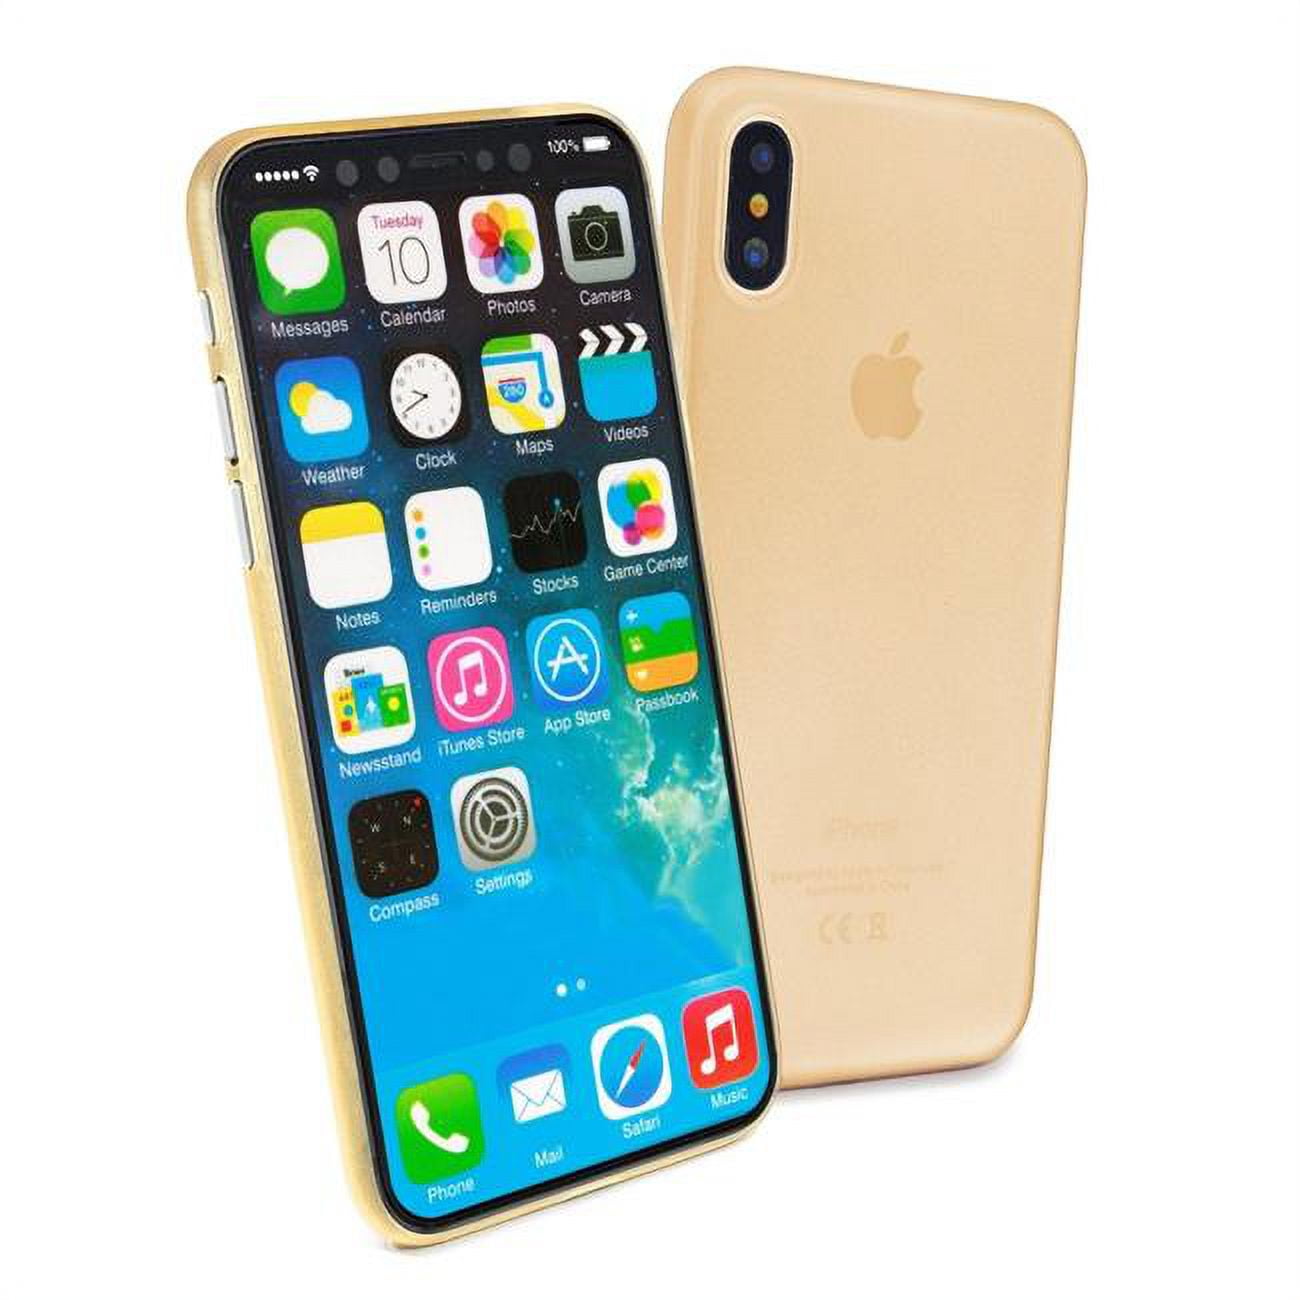 B10-96 Rigid Ultrathin & Light weight Skin Case Cover for Apple iPhone X, Gold -  Tuff-luv, B10_96